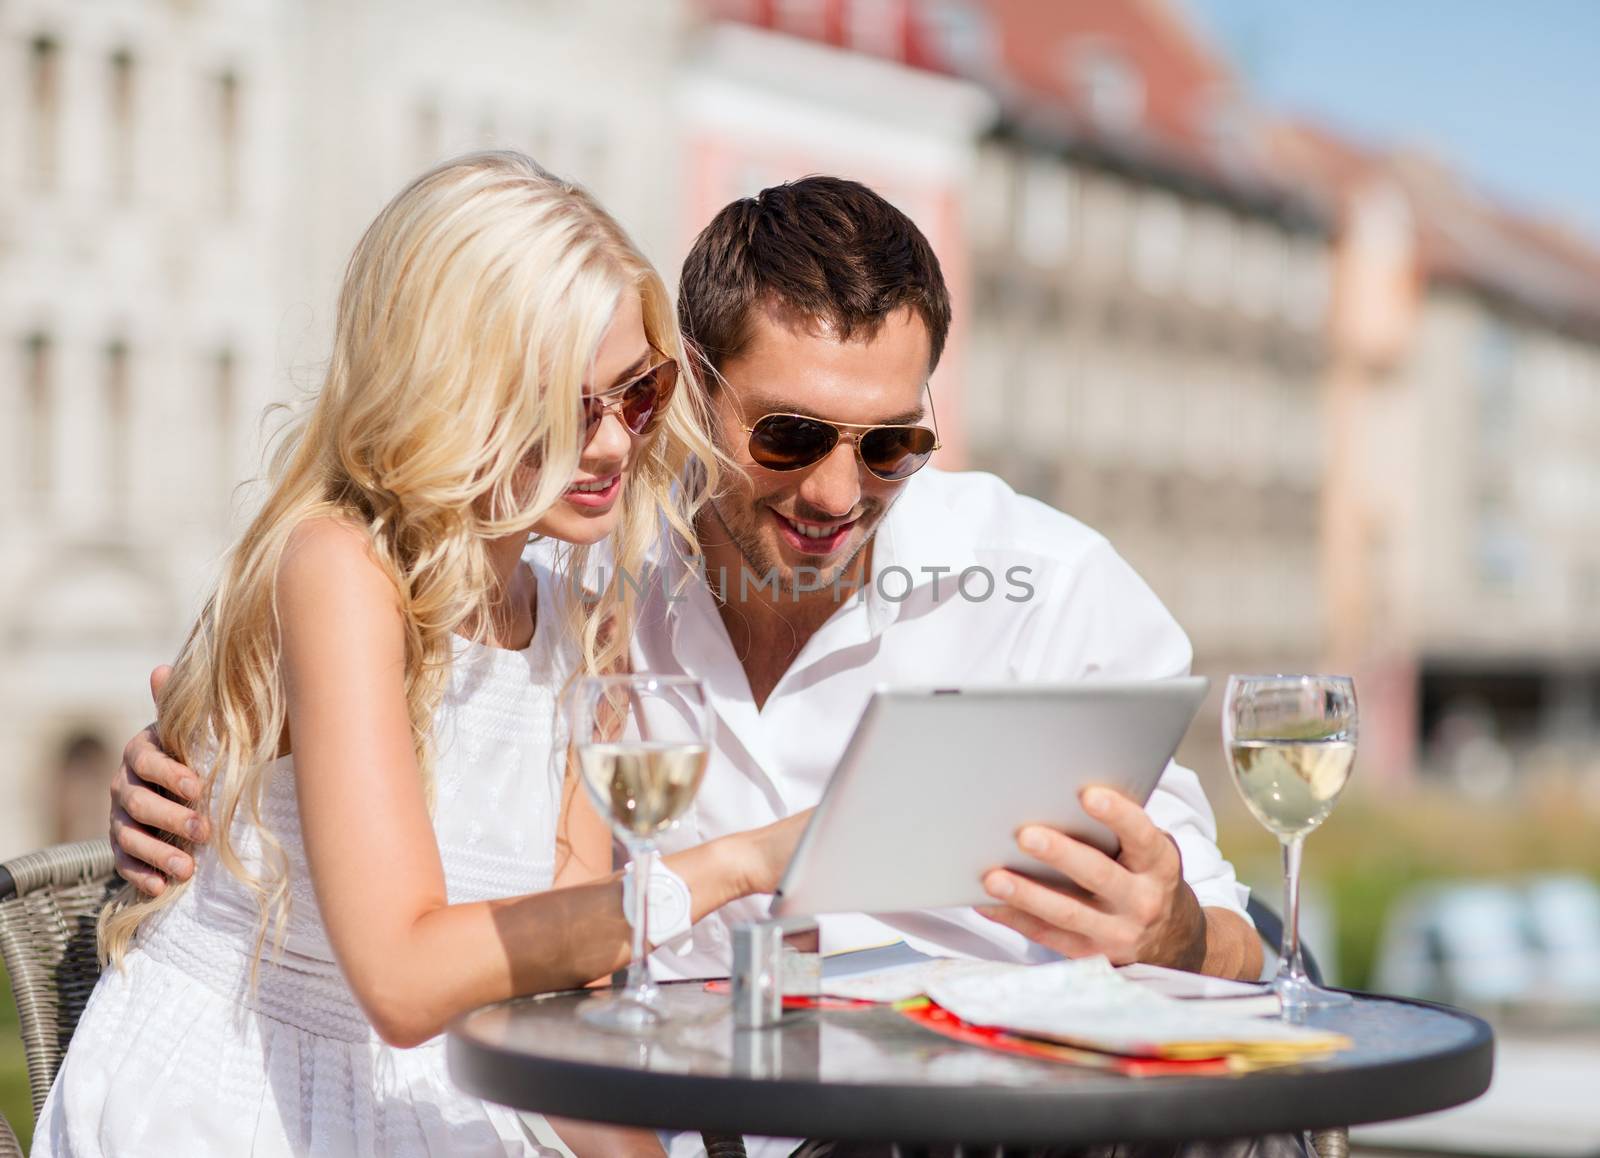 summer holidays, dating and technology concept - couple looking at tablet pc in cafe in the city